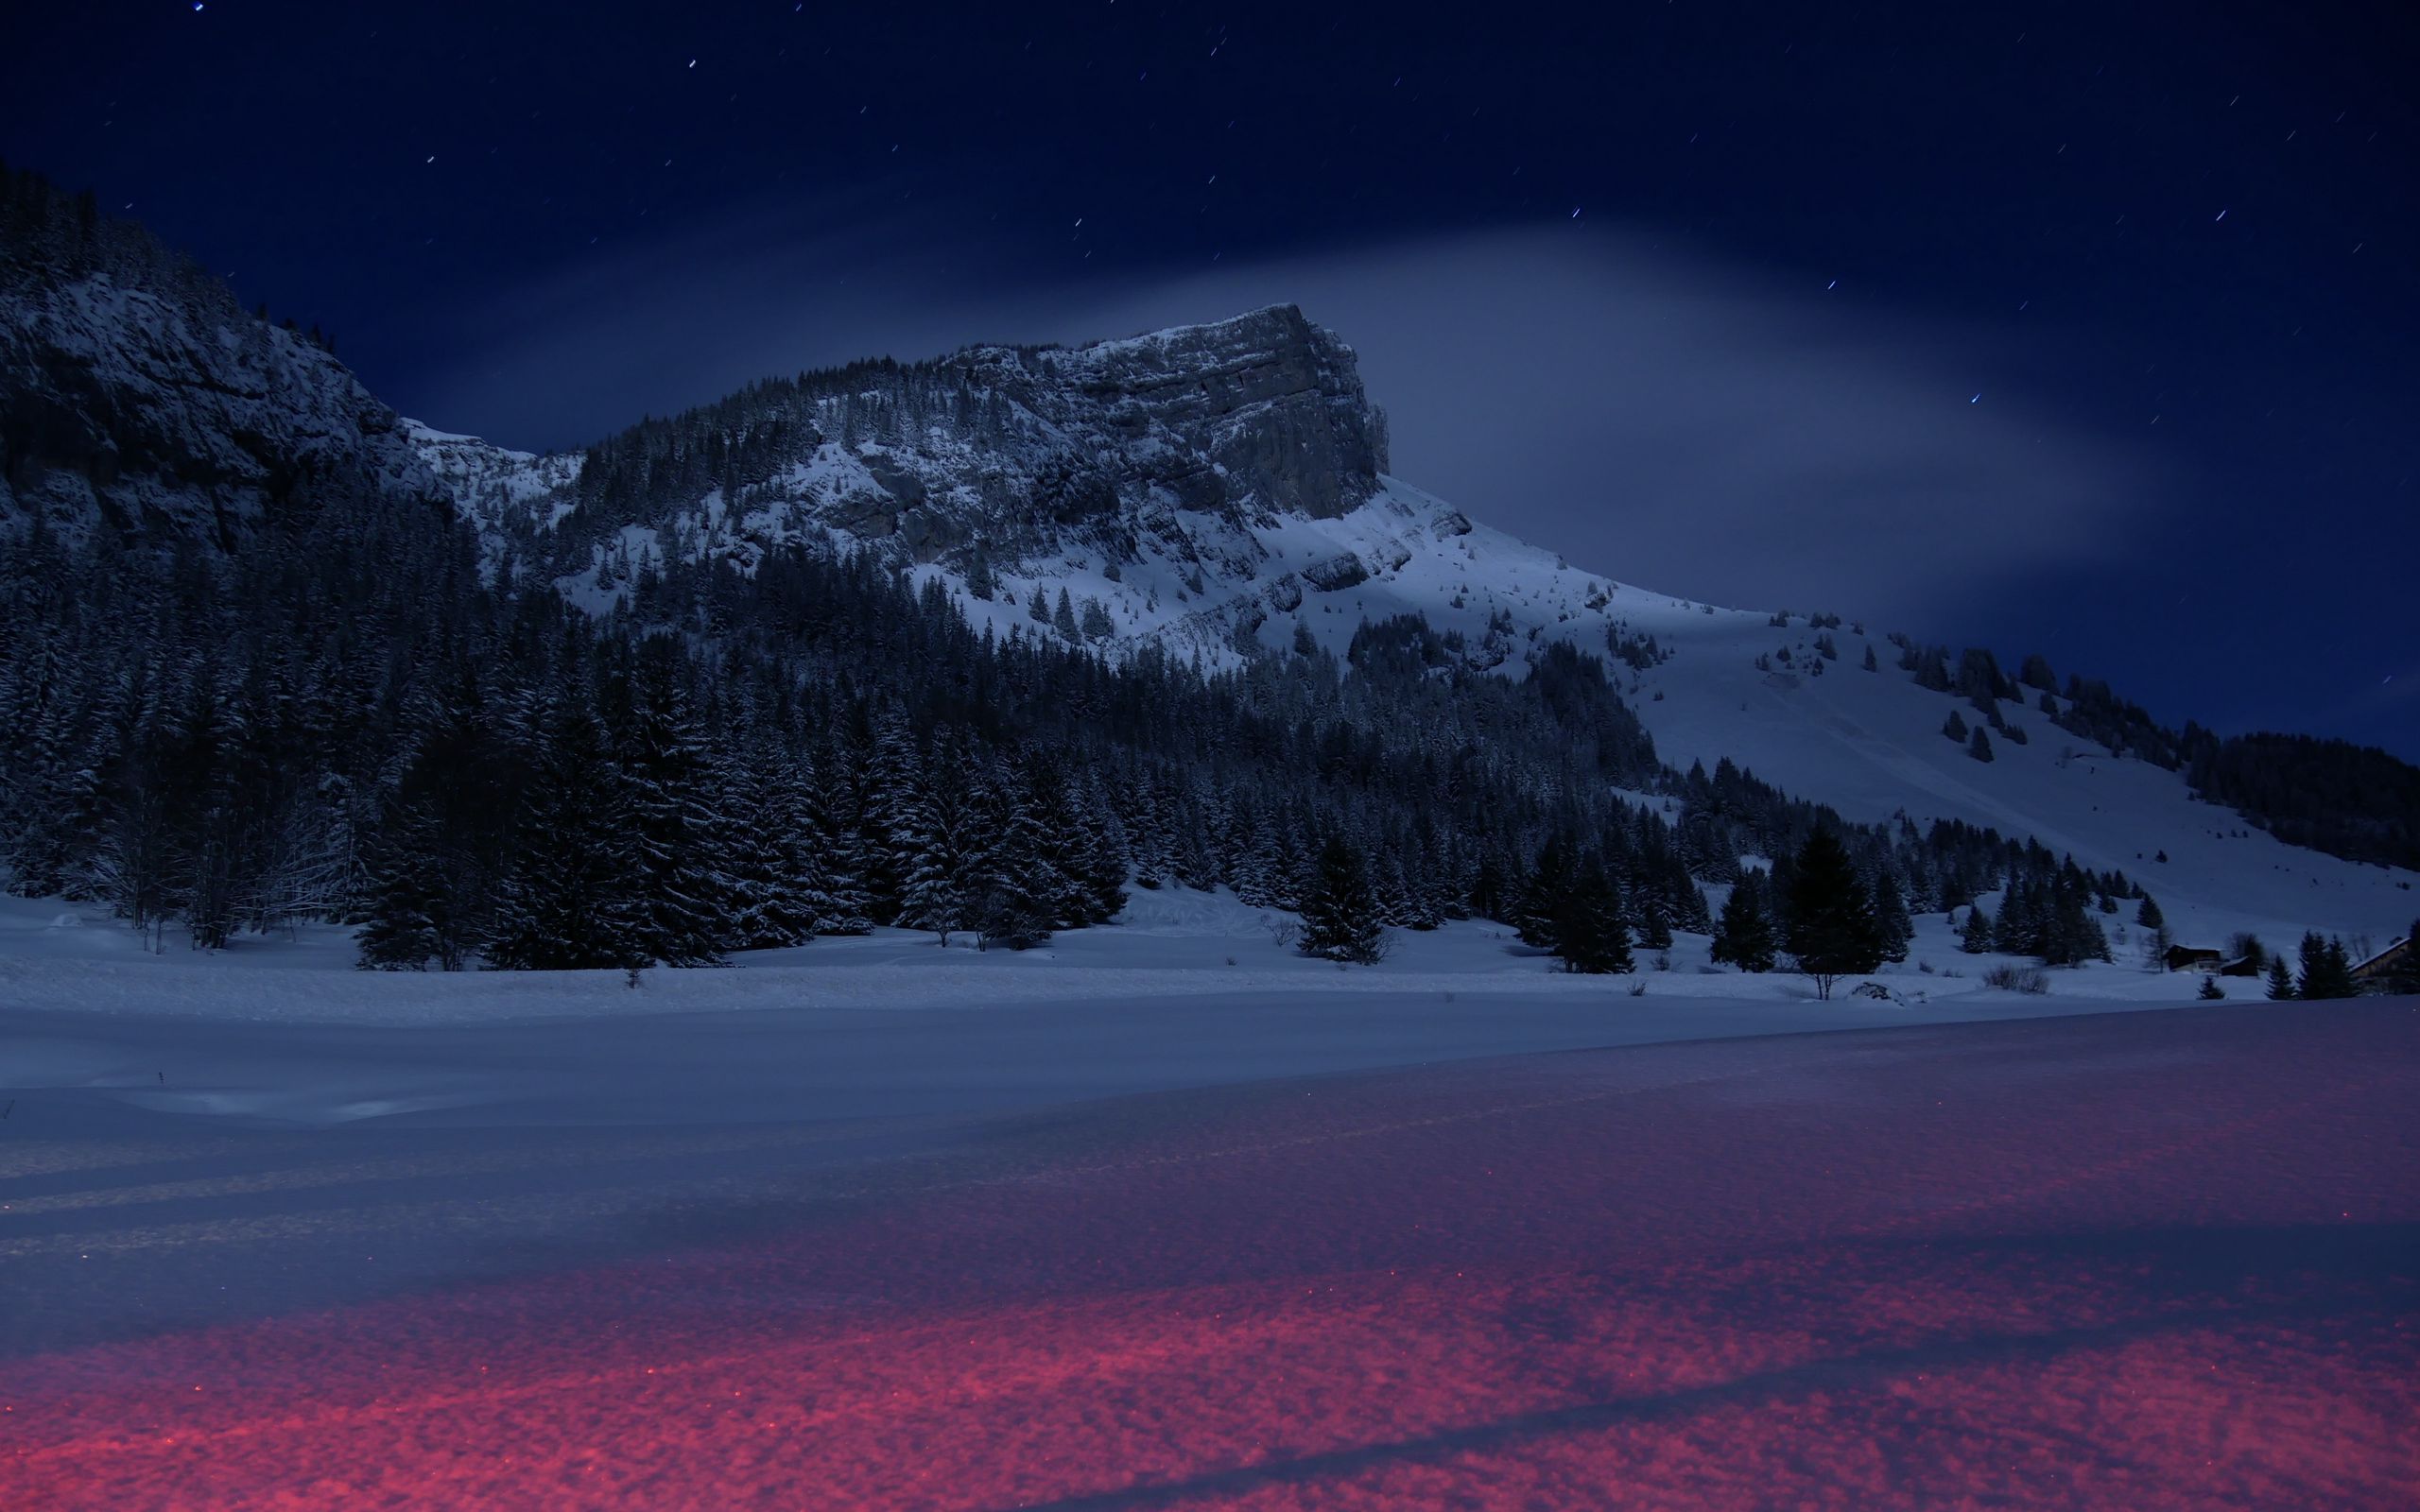 Download wallpaper 2560x1600 mountains, night, winter, snow, landscape, france widescreen 16:10 HD background